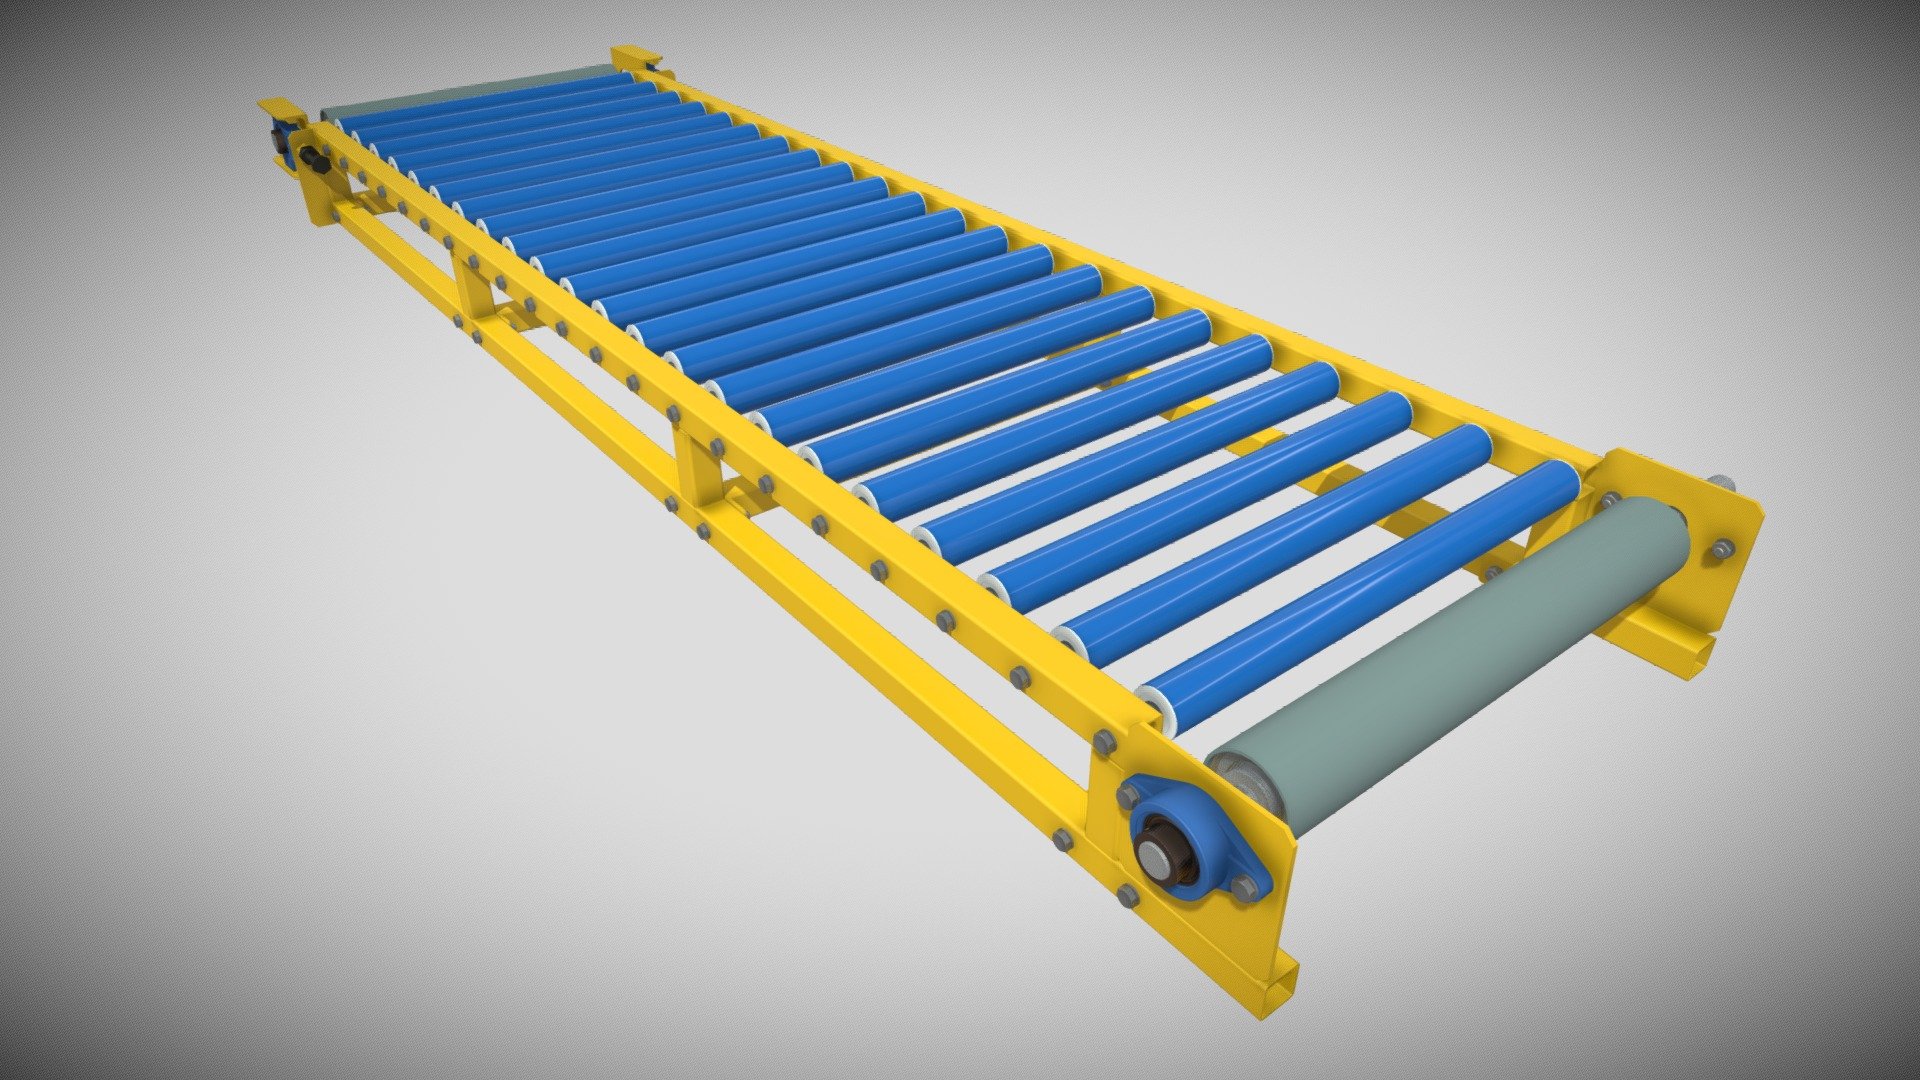 A basic conveyor belt with a square tube frame is a mechanical system used for the continuous transportation of materials from one place to another. The conveyor belt consists of a continuous band that moves over rollers, and the frame that supports and guides the belt is constructed with square tubes.

This design with square tubes in the fracommon in conveyor belts used in various industries such as mining, logistics, manufacturing, and agriculture, among others. The square shape of the tubes provides structural stability and facilitates the construction of the frame to support the required loads and working conditions 3d model